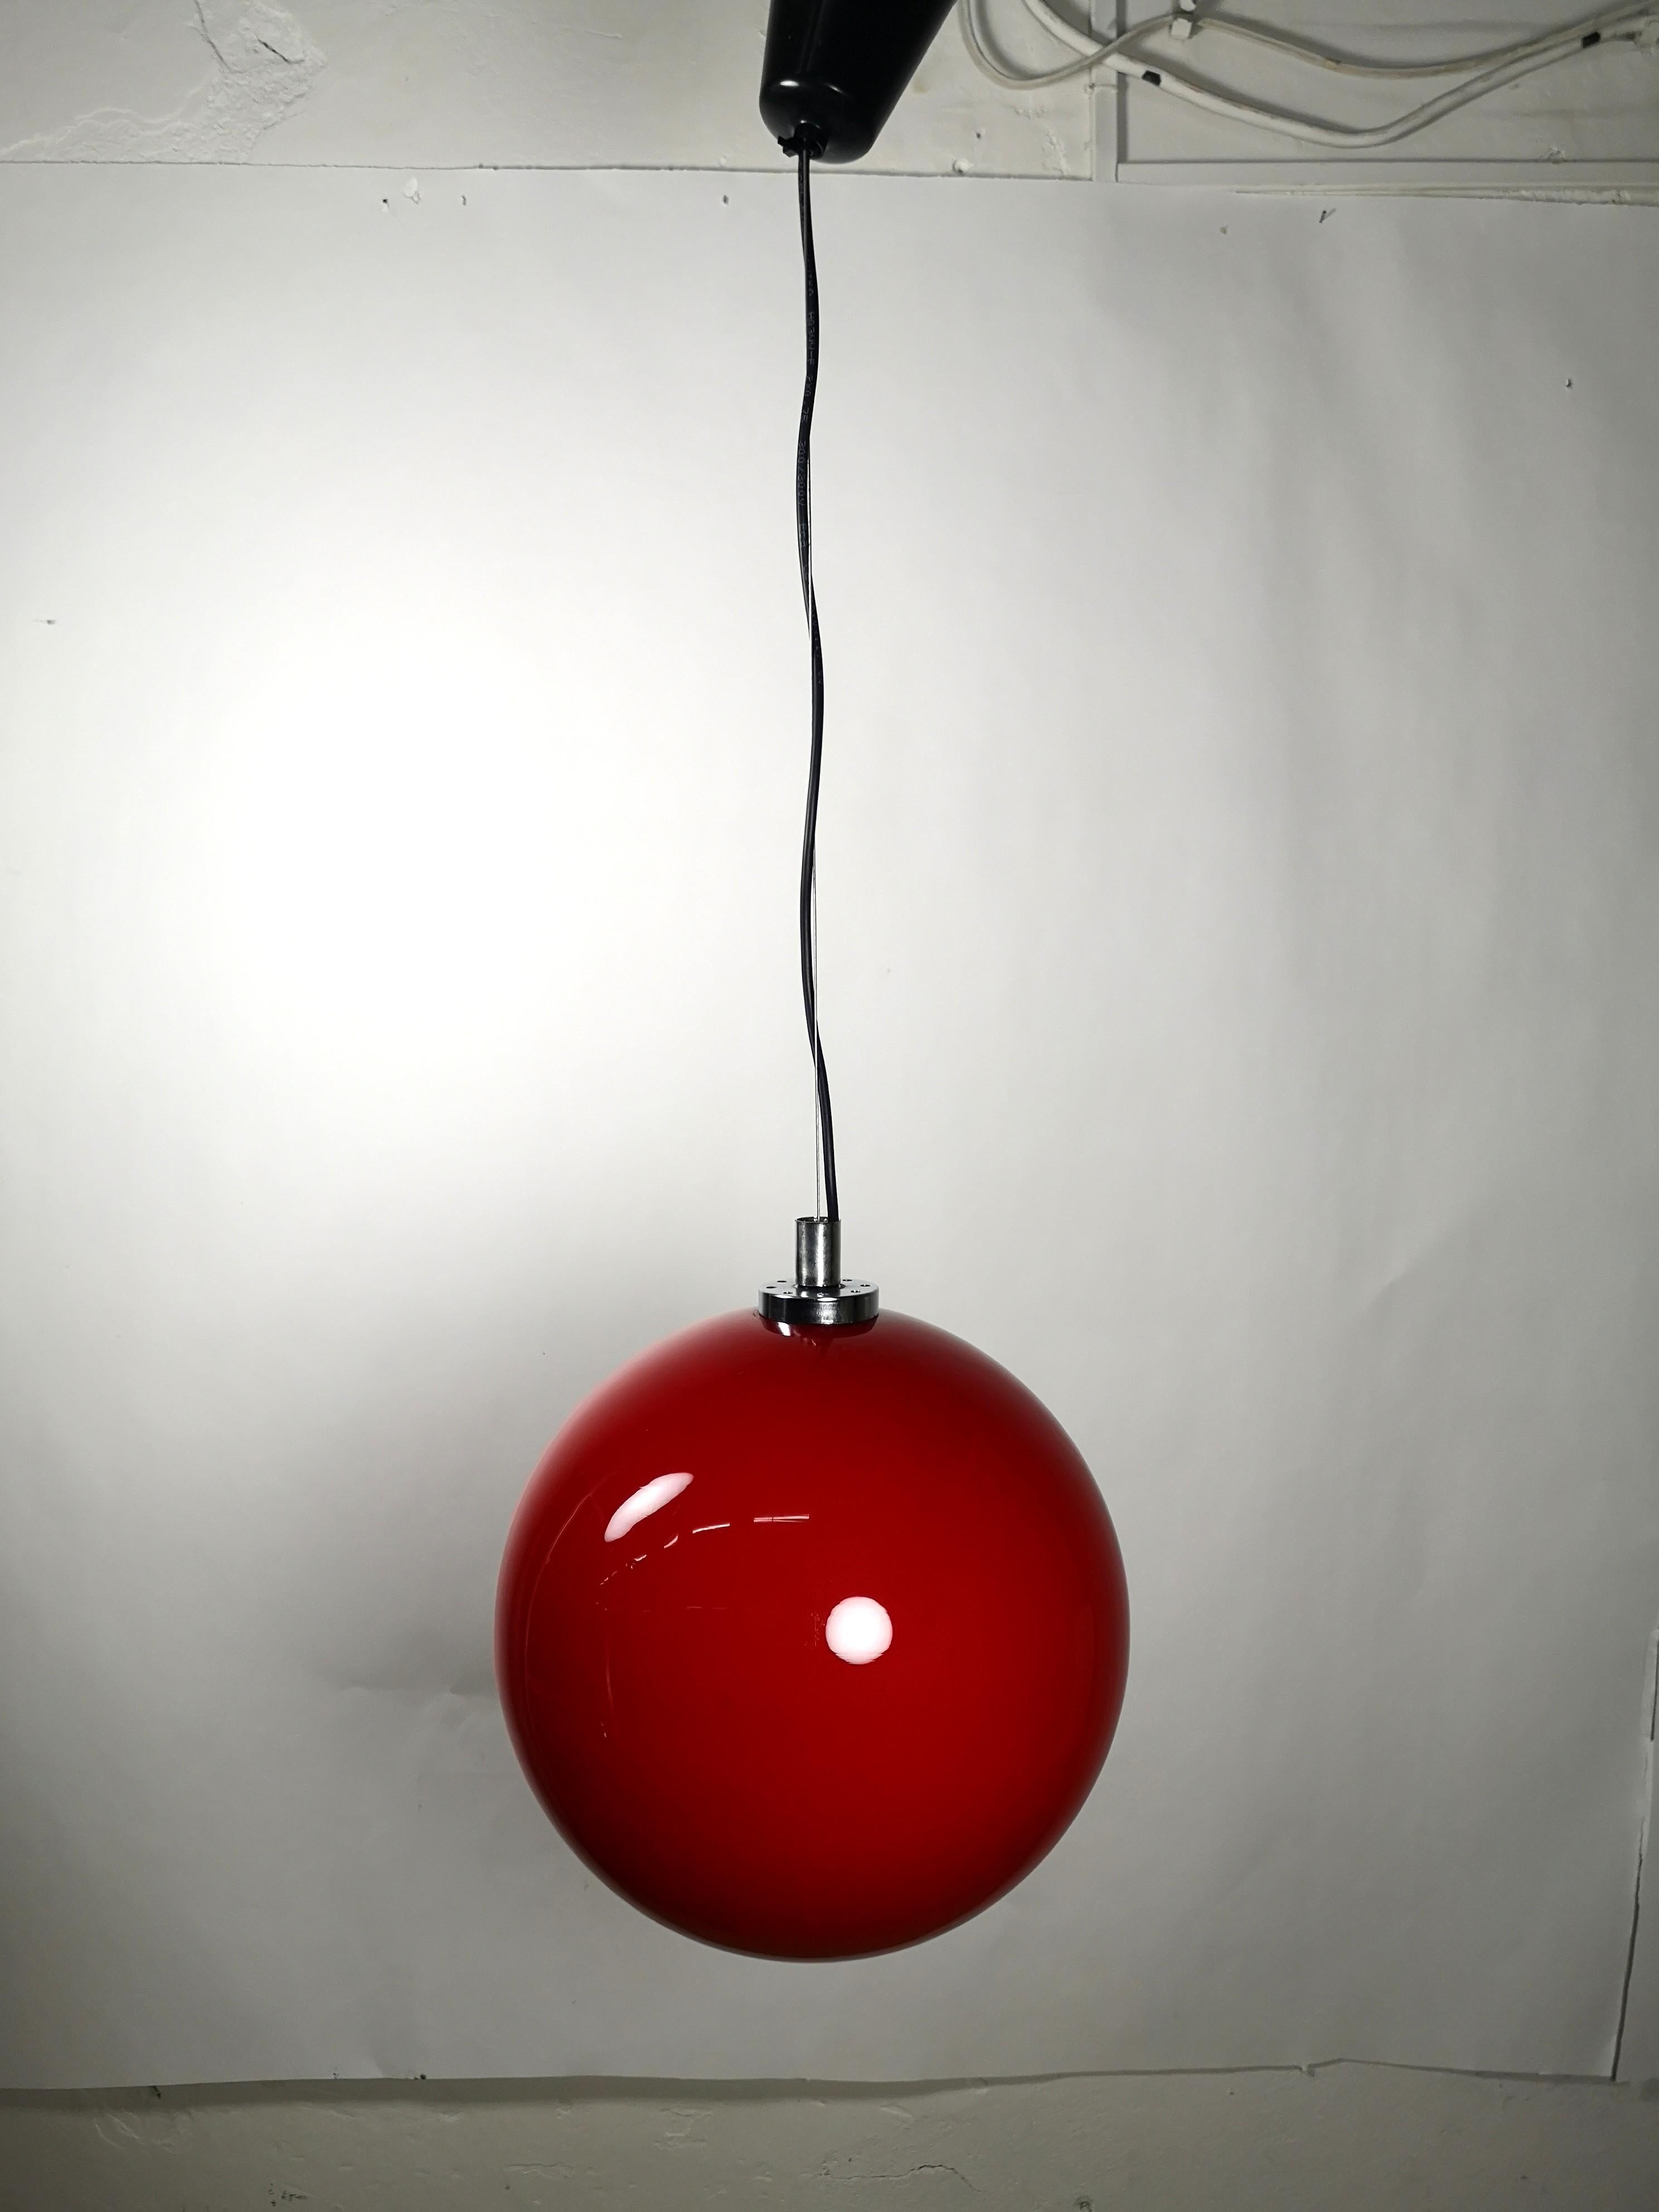 This Italian red glass globe chandelier features a thick colored glass construction, nickel plated accessories and one socket up to 100W's.
It's in excellent condition.